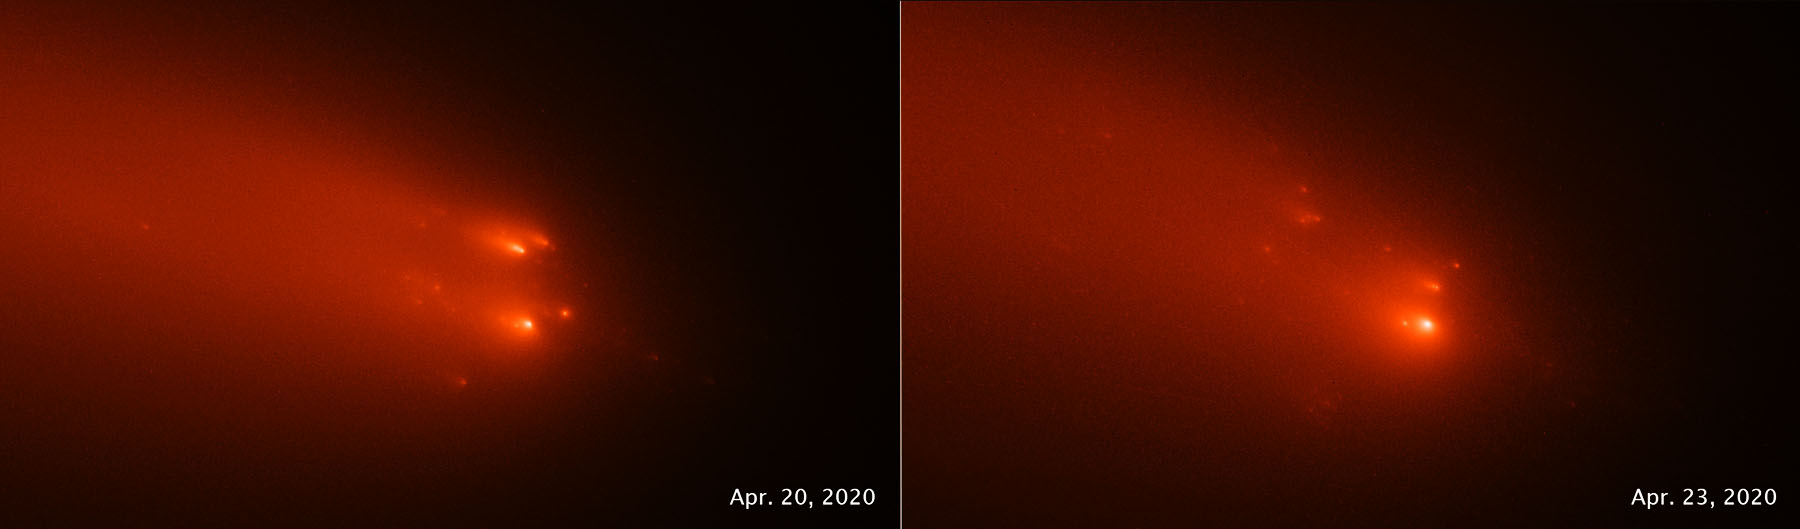 his pair of Hubble Space Telescope images of comet C/2019 Y4 (ATLAS), taken on April 20 and April 23, 2020, reveal the breakup of the solid nucleus of the comet. Hubble photos identify as many as 30 separate fragments. The comet was approximately 91 million miles from Earth when the images were taken. The comet may be a broken off piece of a larger comet that swung by the Sun 5,000 years ago. The comet has been artificially colored in this view to enhance details for analysis.